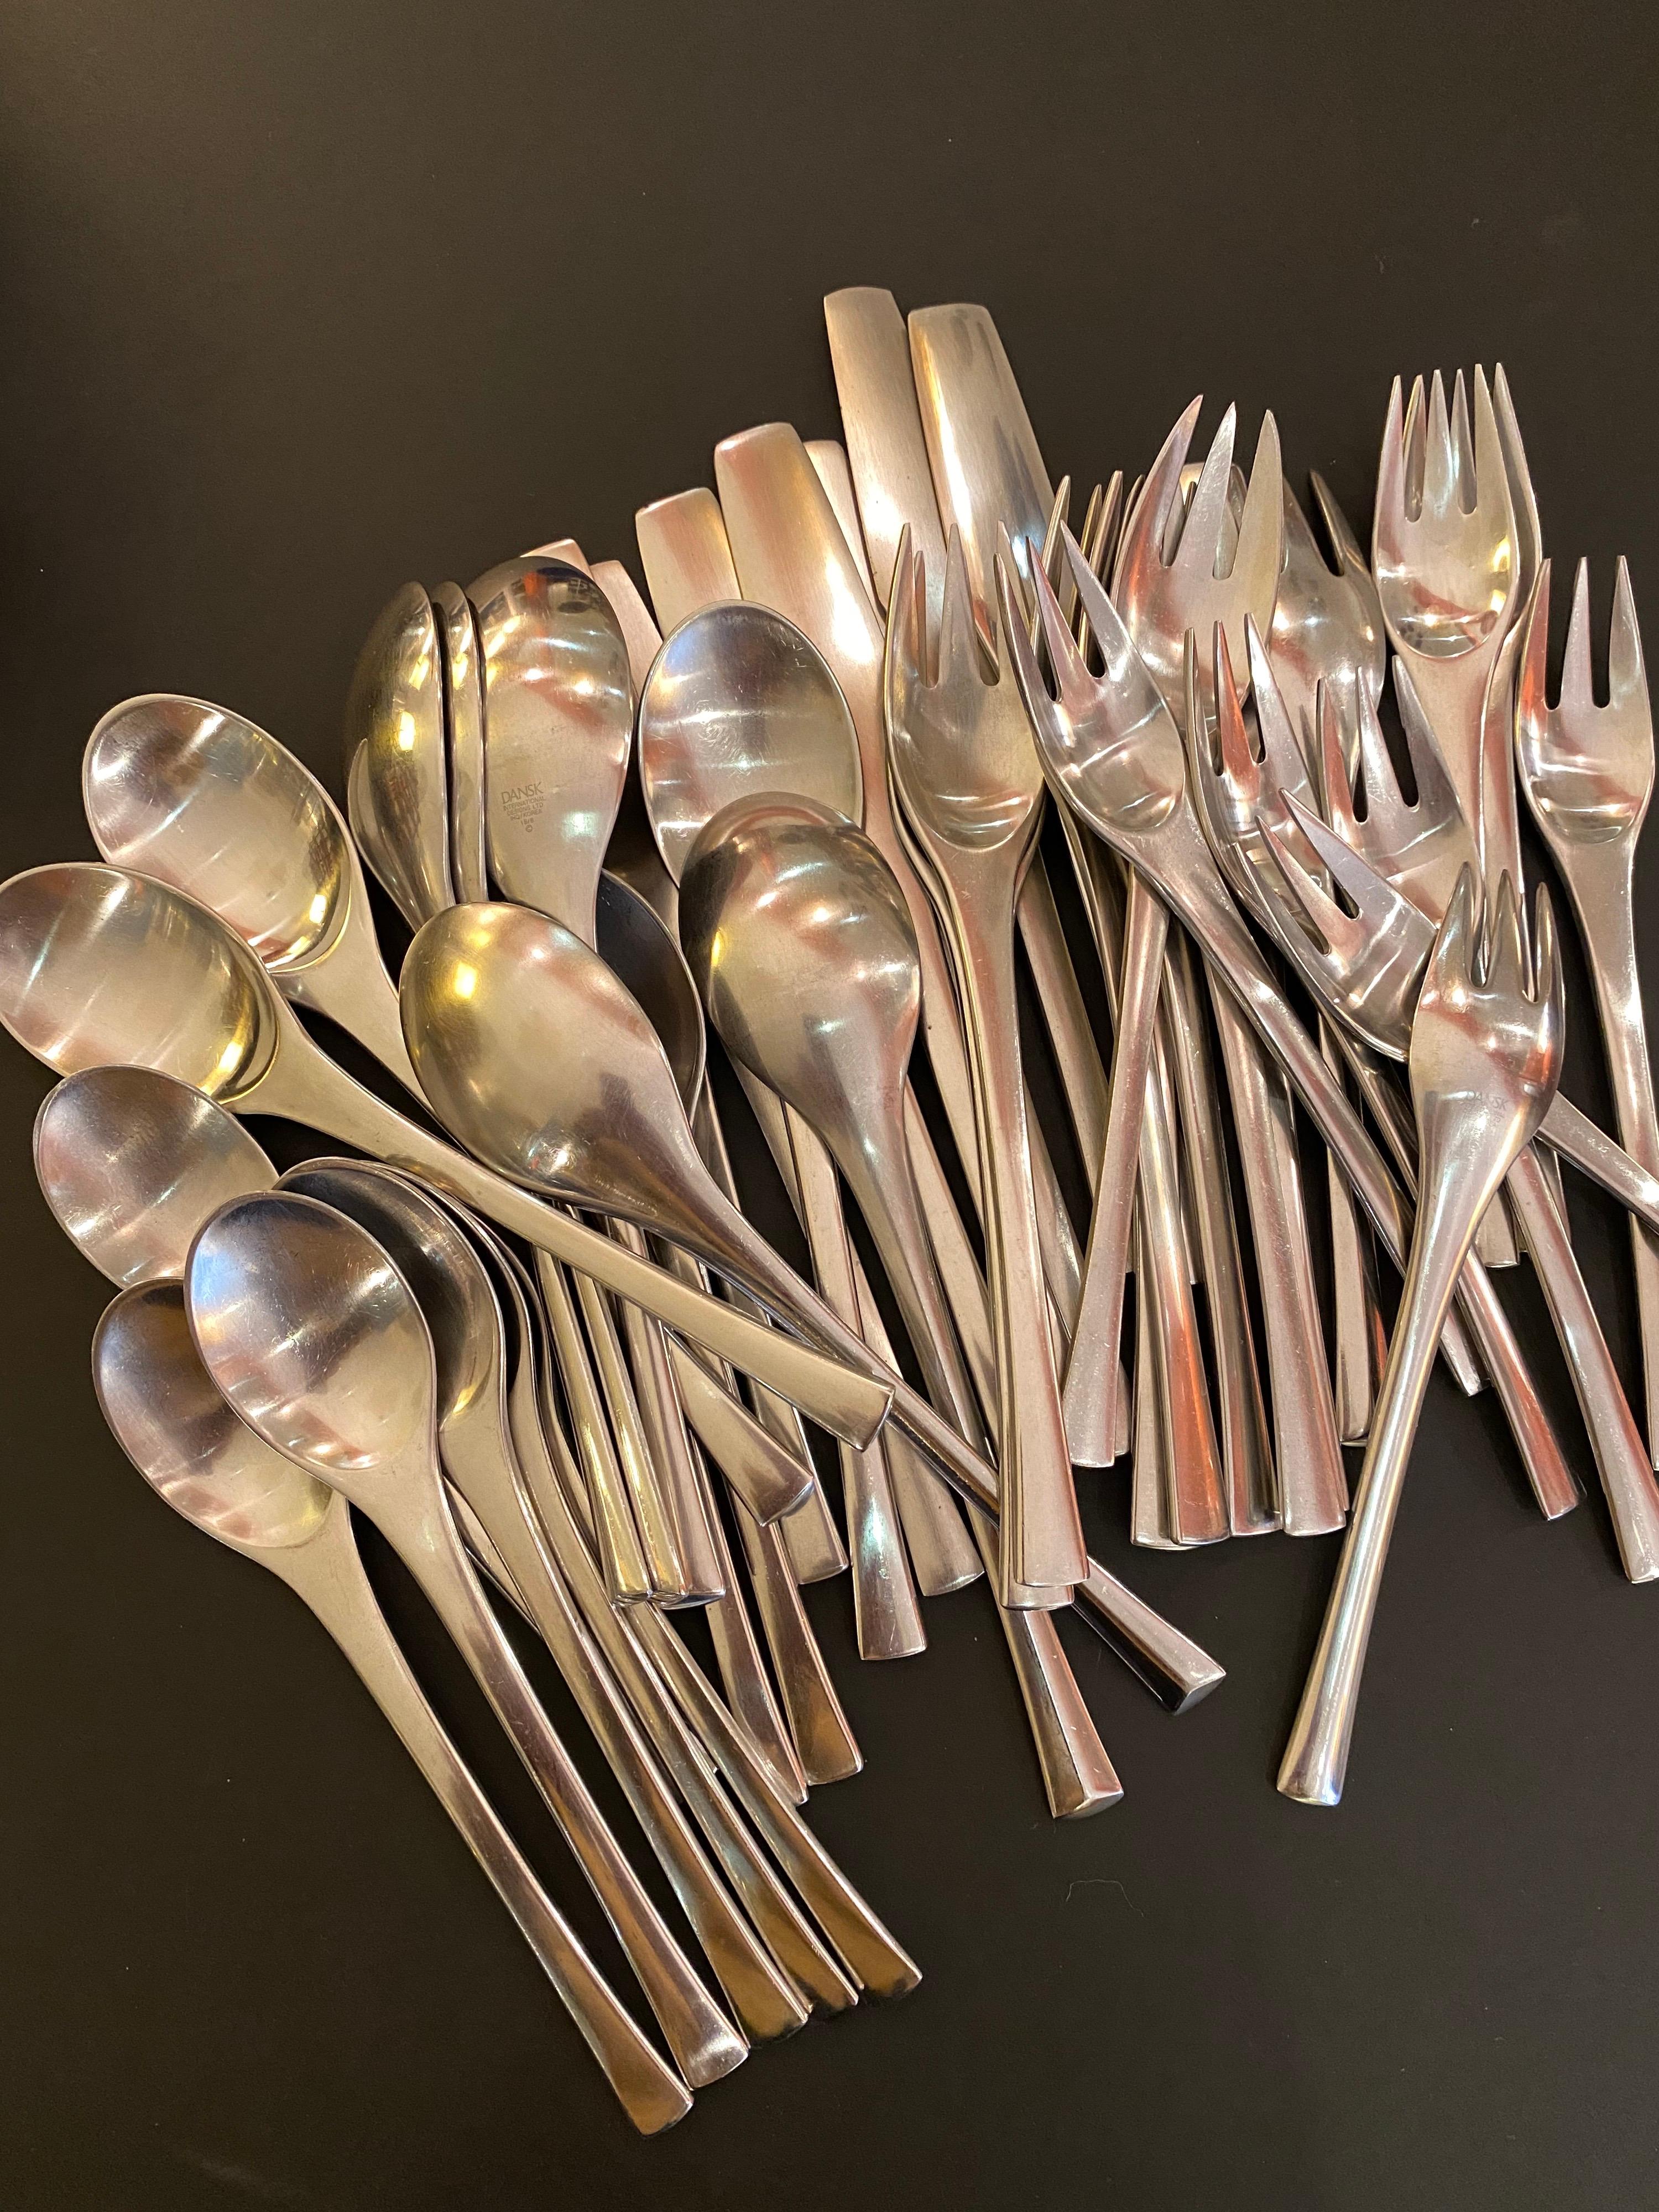 Dansk Odin flatware designed by Jens Quistgaard and manufactured in Germany and Korea. Listing includes service for 8. Stainless is in a Satin finish. Nice weight and Scale to pieces! One of my favorite designs from Quistgaard.